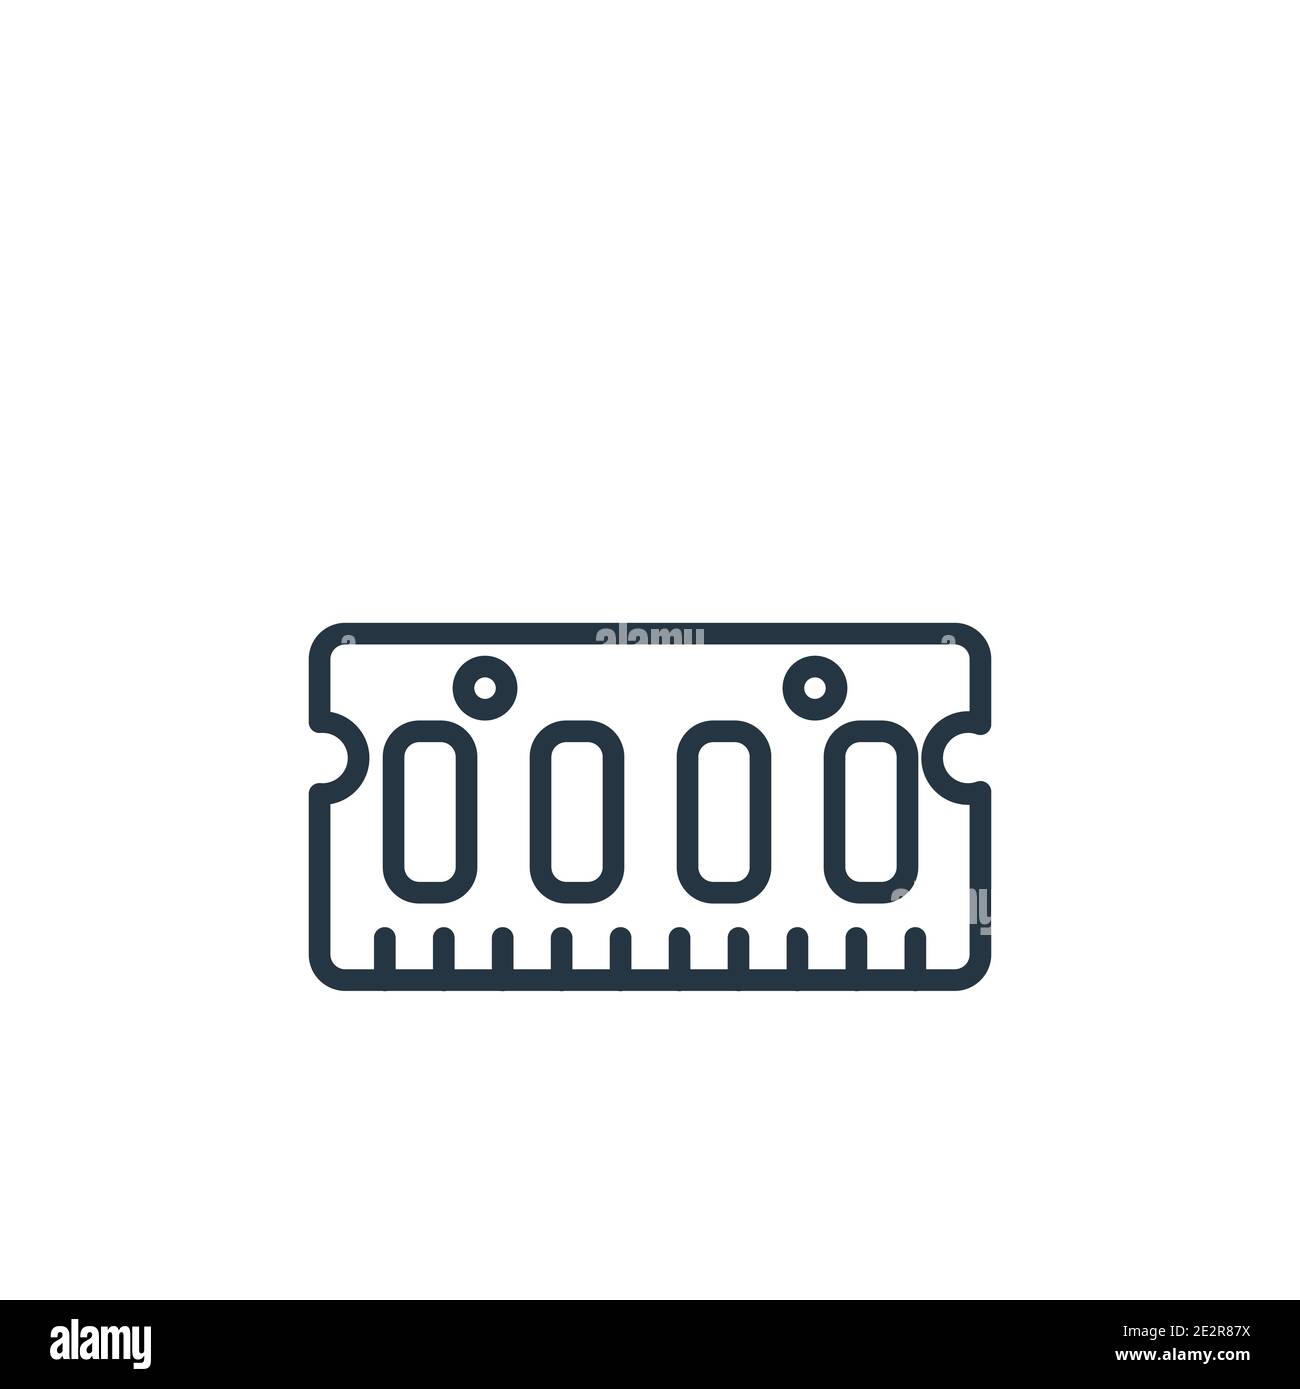 Ram Memory icon vector isolated on white background, logo concept